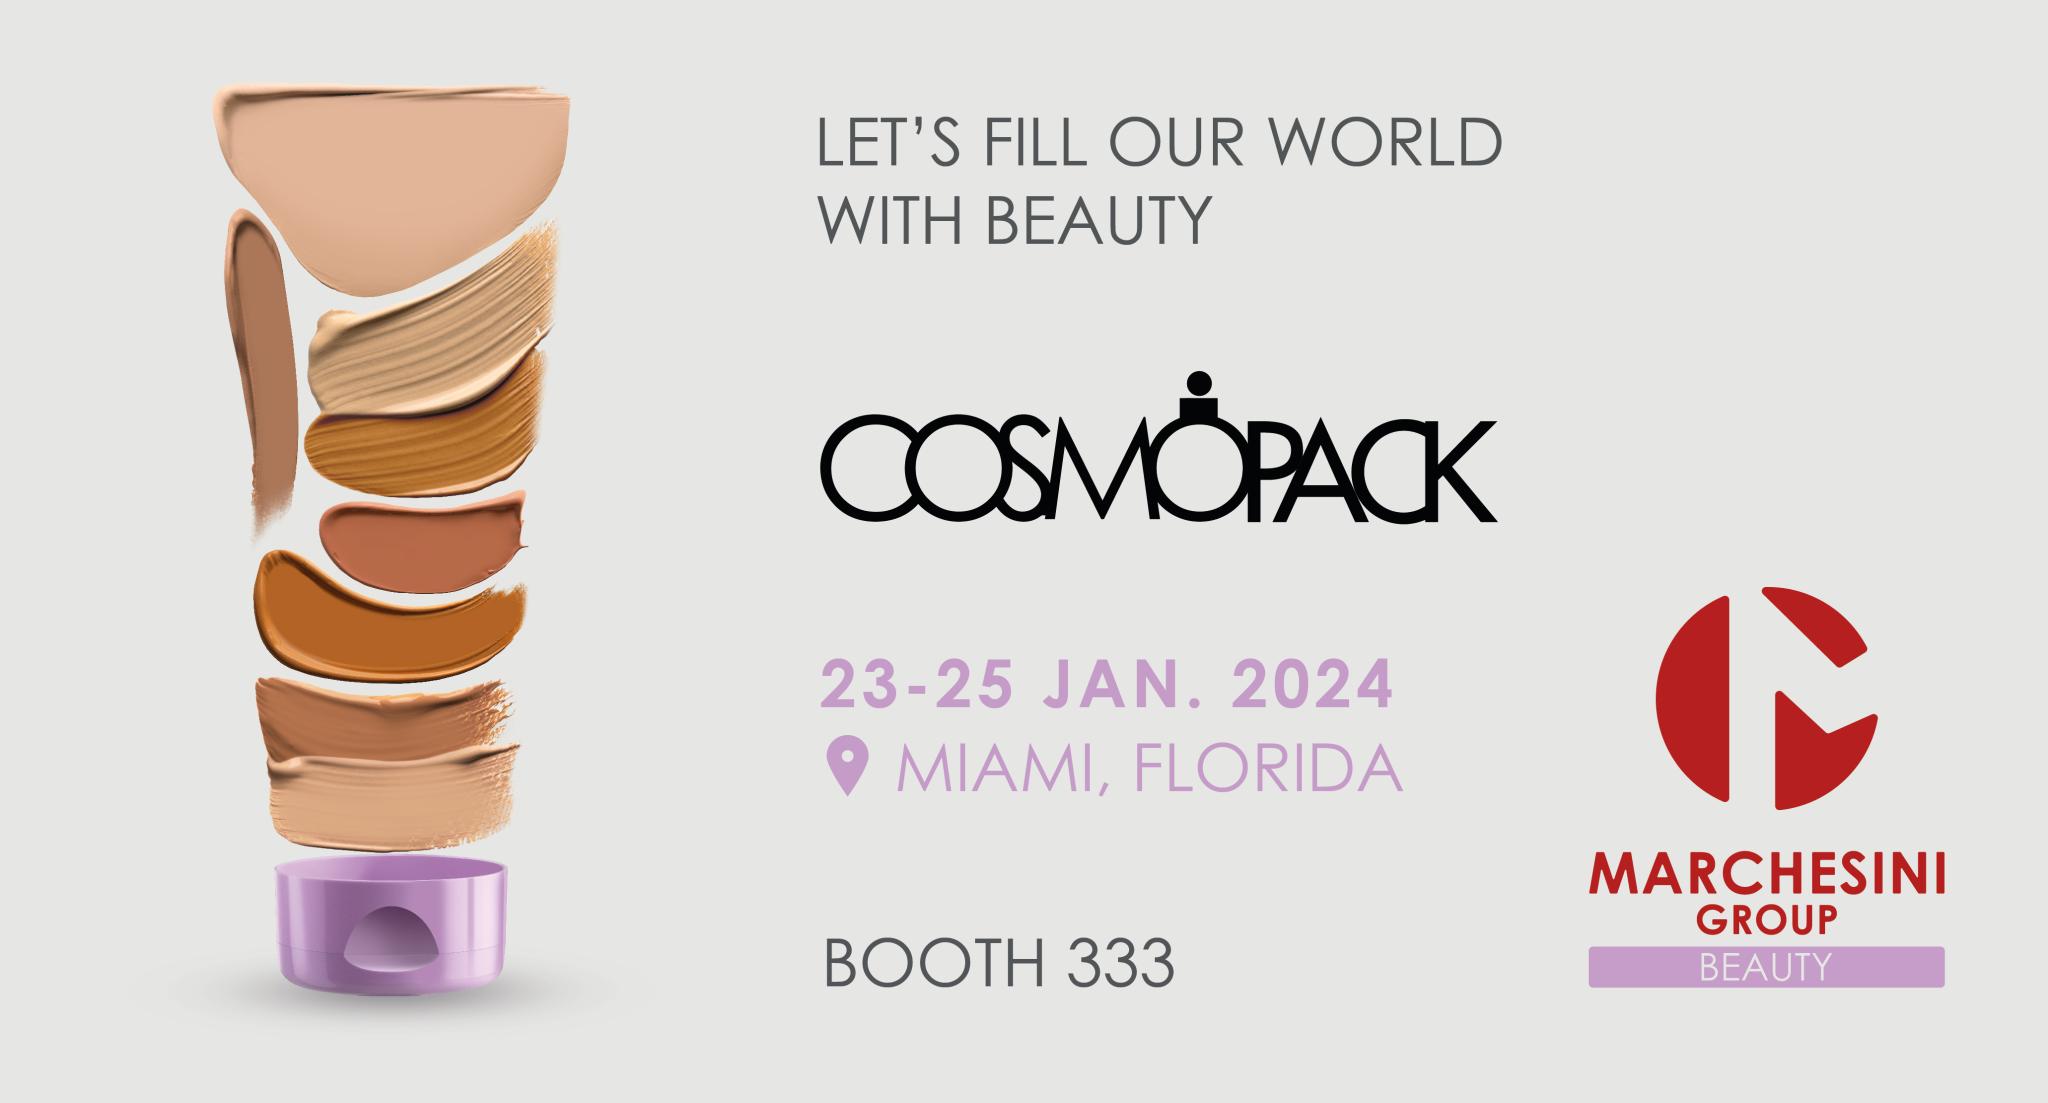 Marchesini Group Beauty at Cosmoprof Miami 2024